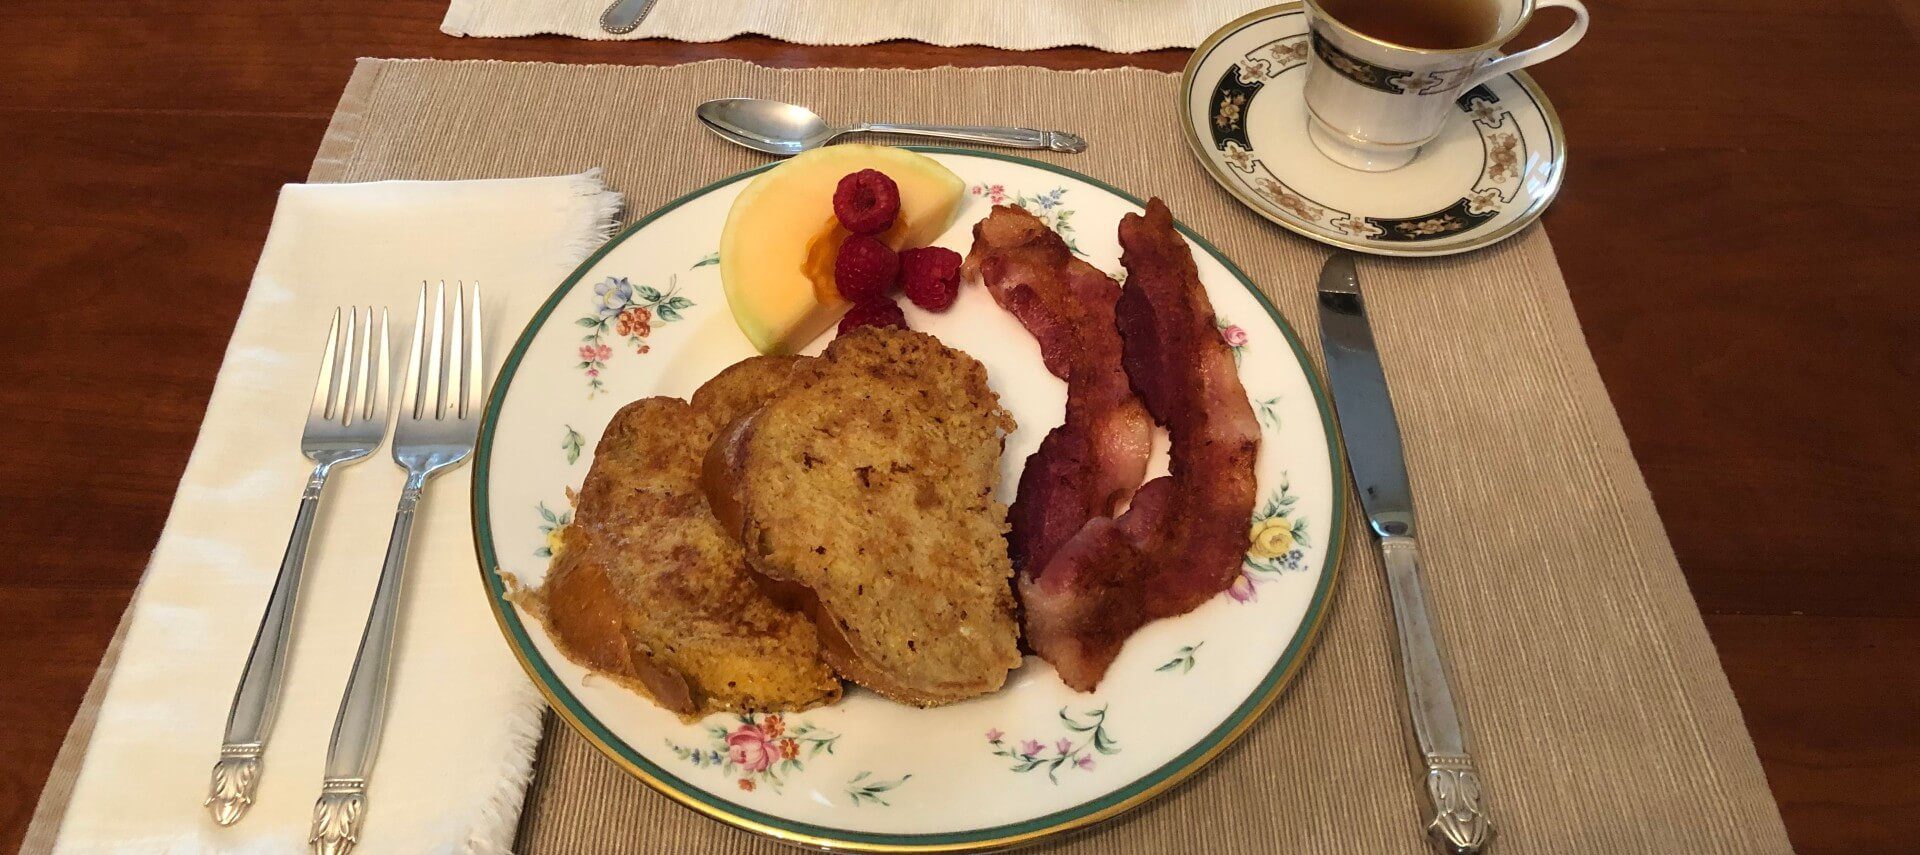 Two slices of french toast, two slices of bacon, and some cantaloupe and berries on fine china on a placemat with a sliver place setting.